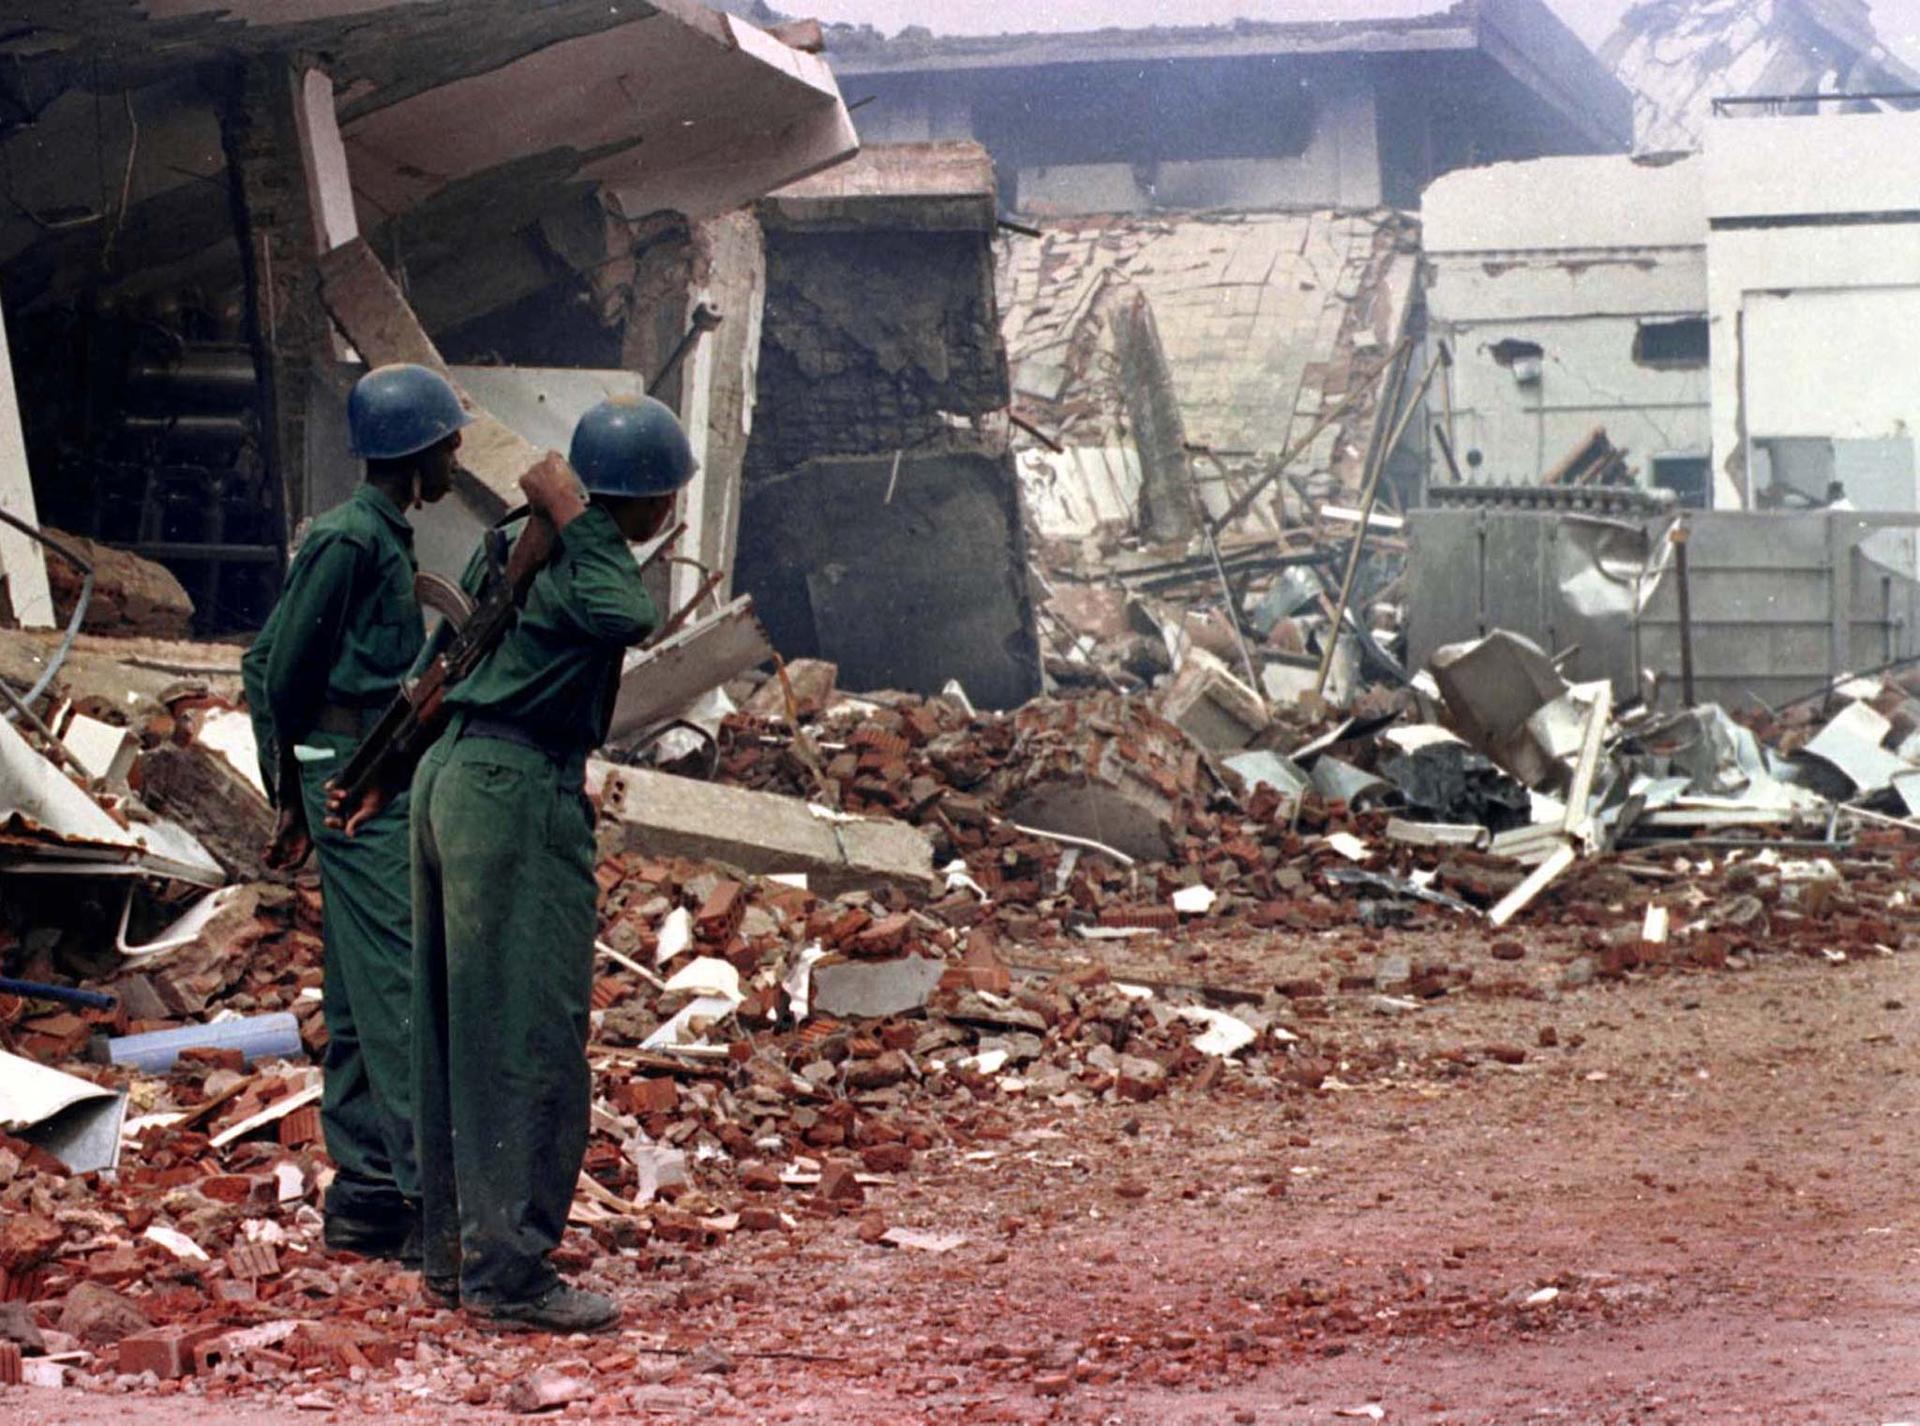 Sudanese security forces stand guard by the flattened rubble of a pharmaceutical factory in the northern outskirts of Khartoum, on Aug. 22, 1998. The United States attacked the plant on Aug. 20, saying it was involved in chemical weapons production and ha